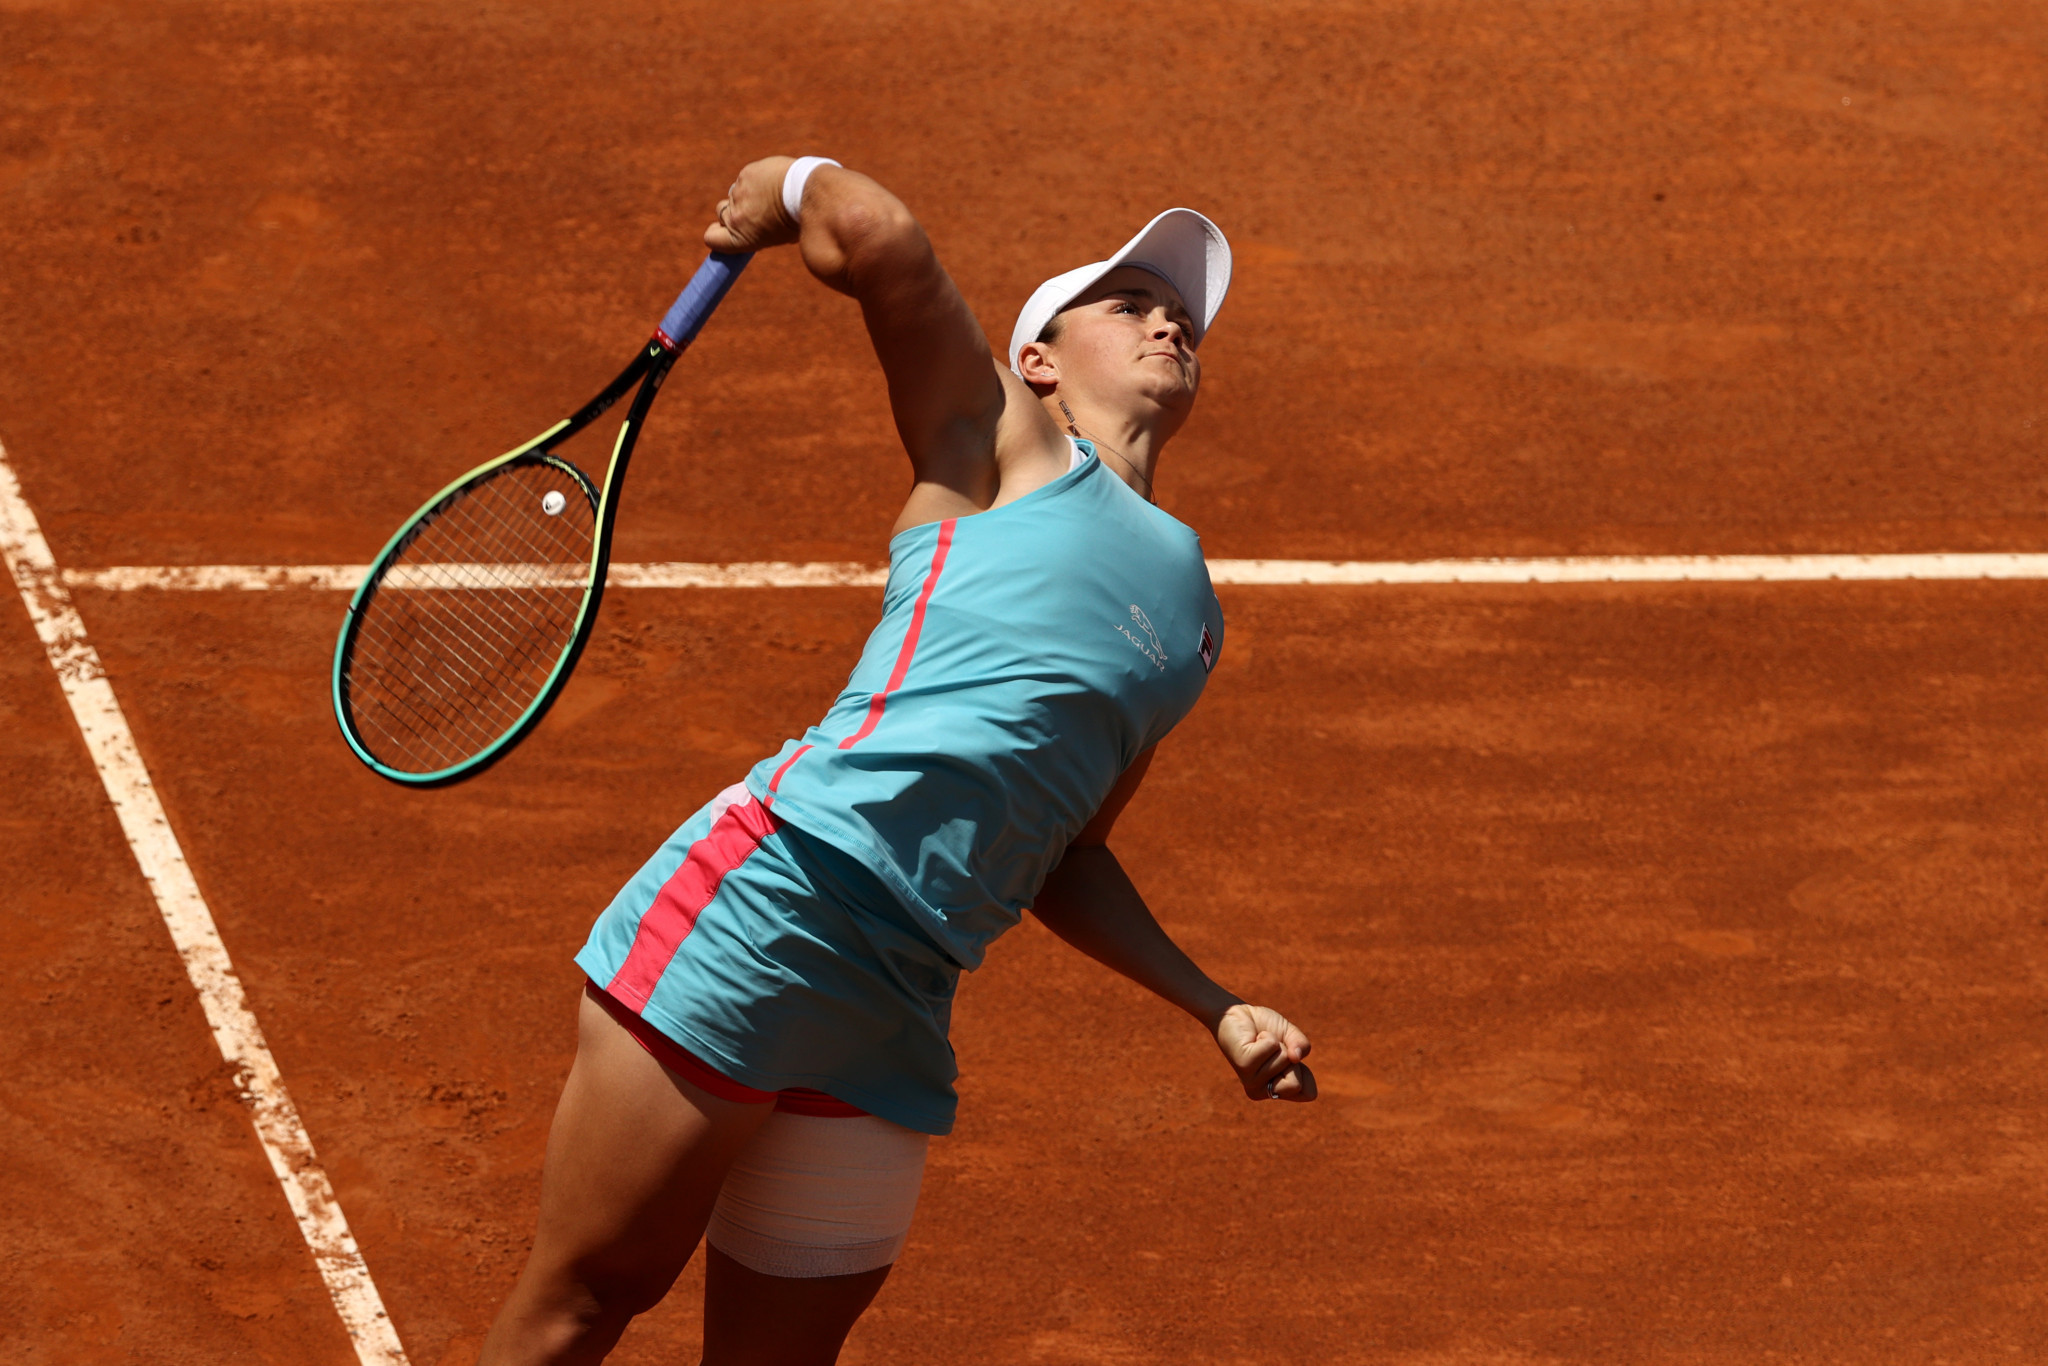 Women's top seed Ashleigh Barty of Australia reached the quarter-finals with a straight sets win in Rome ©Getty Images